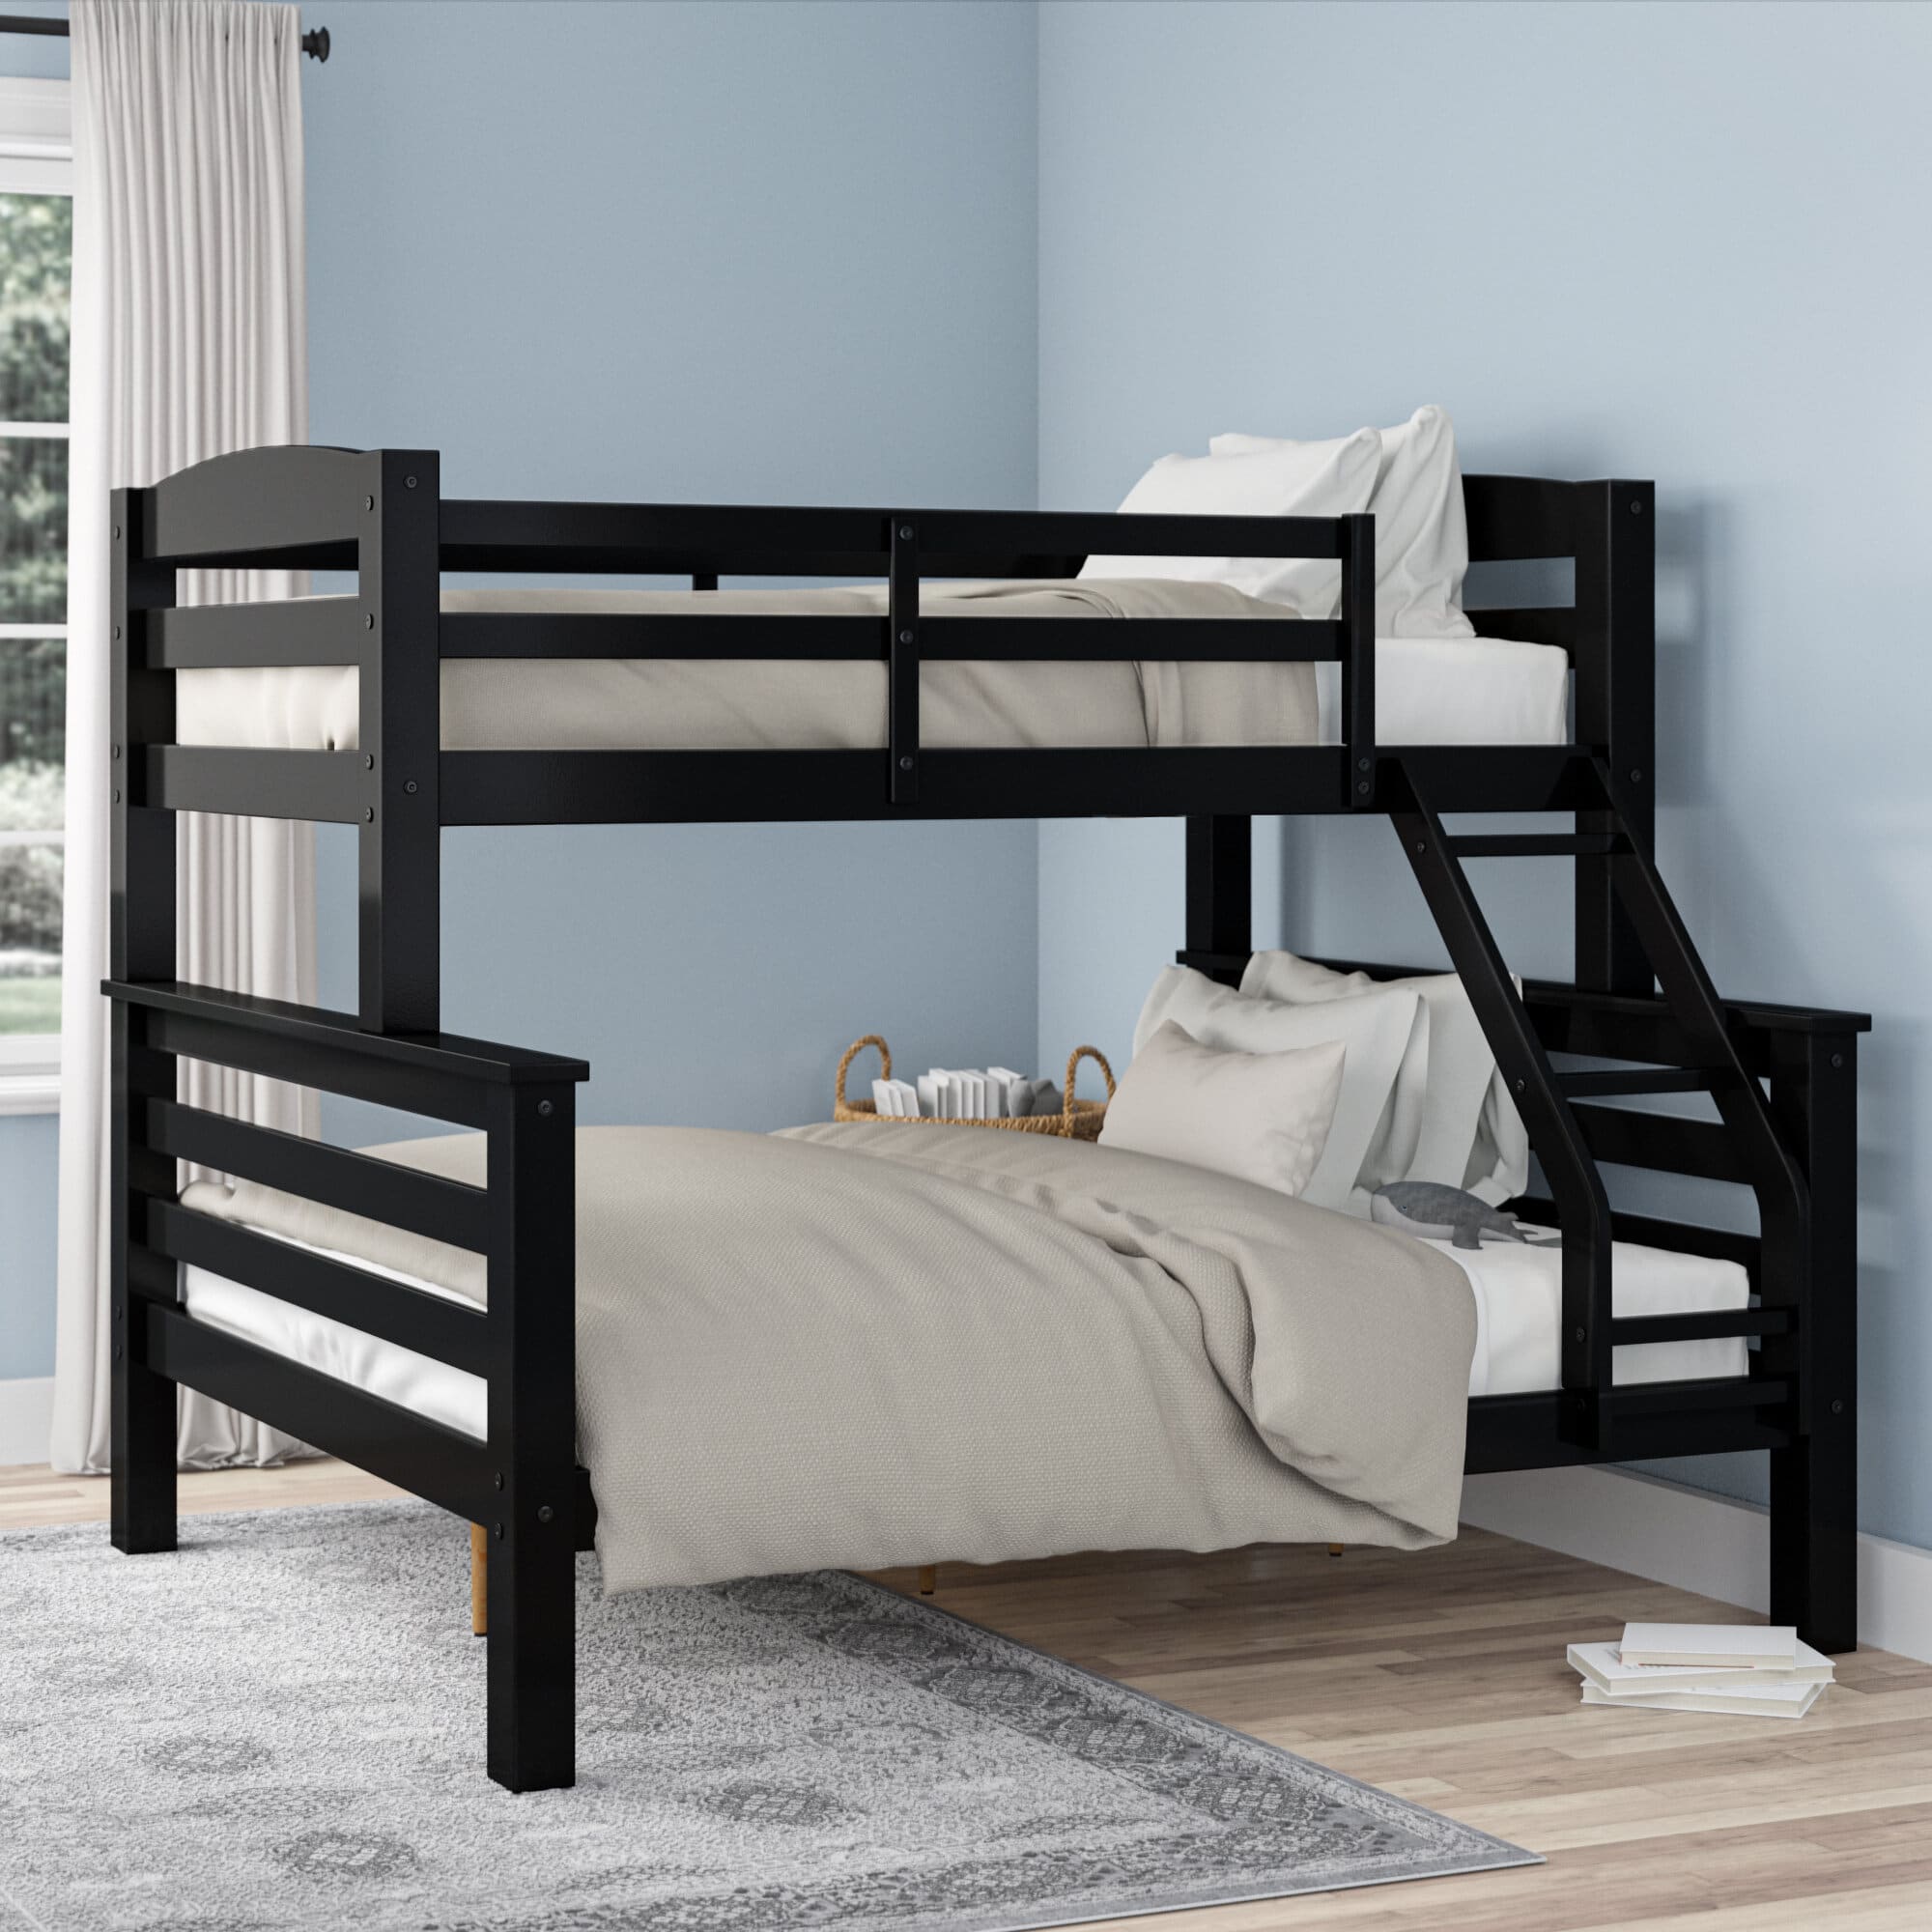 6 Best Twin Over Full Bunk Beds May, Full Over Bunk Beds That Separate